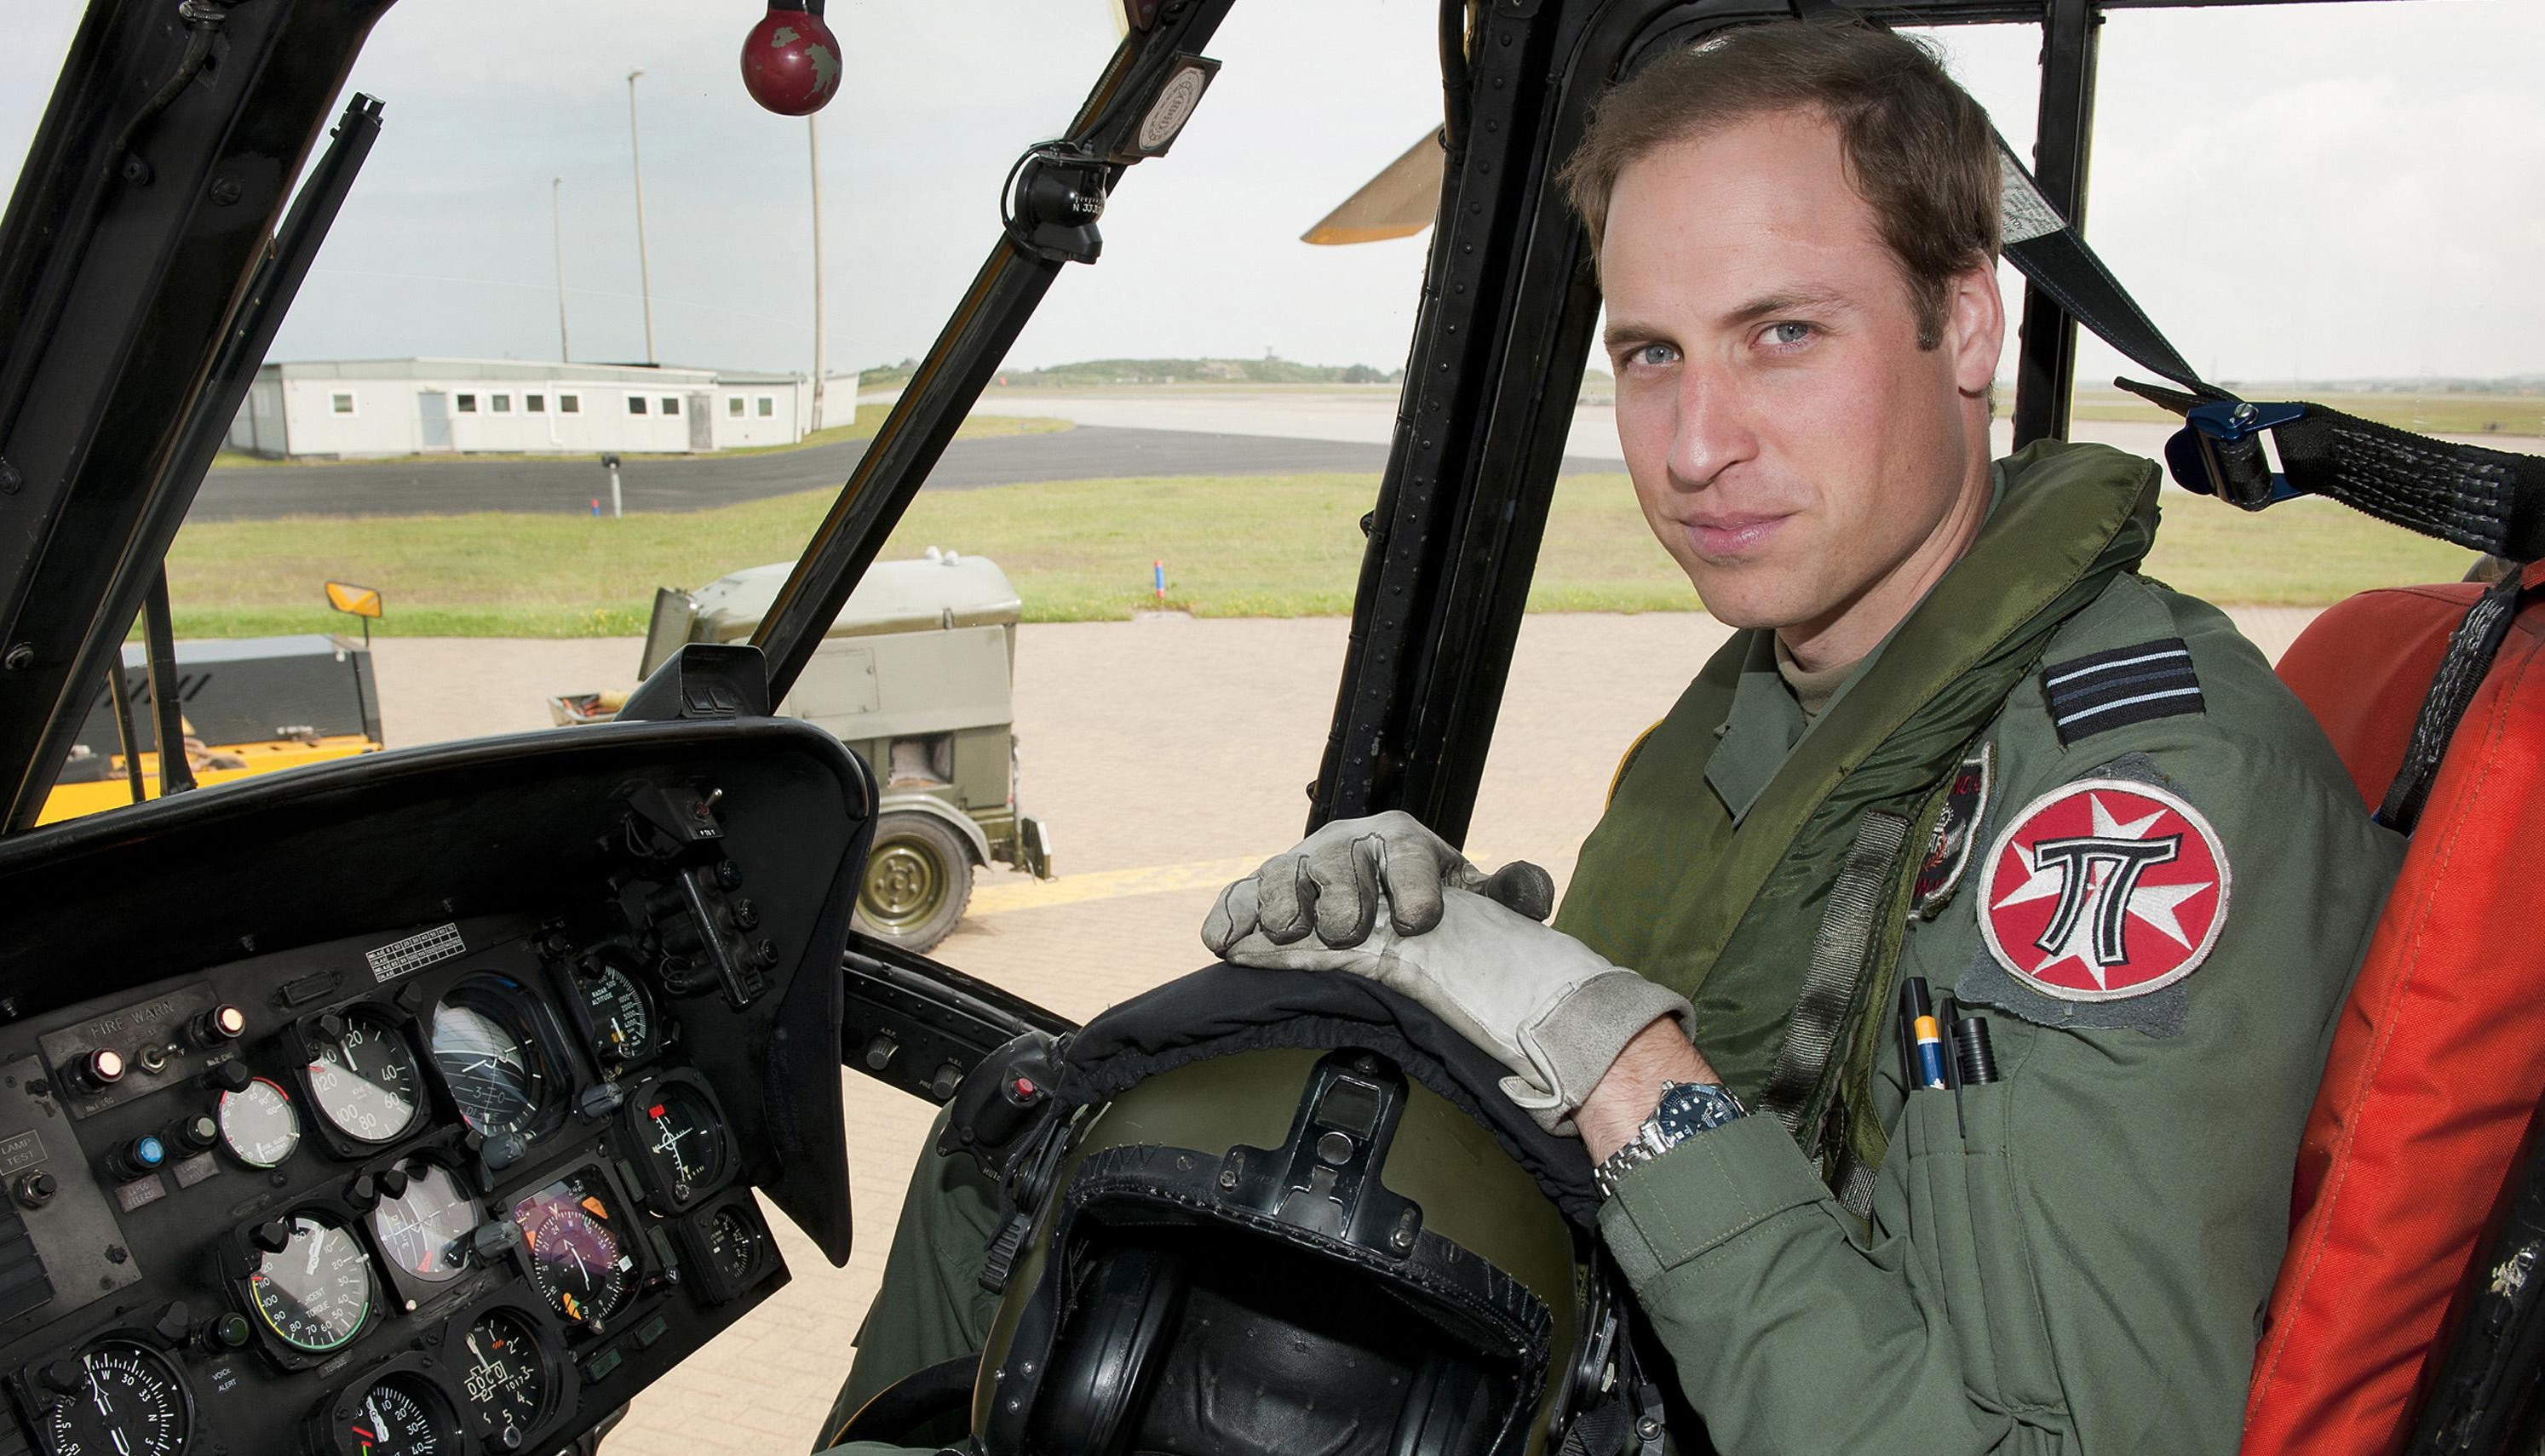 Prince William in the cockpit of a helicopter at RAF Valley in Anglesey, Wales in June 2012. (AAP)